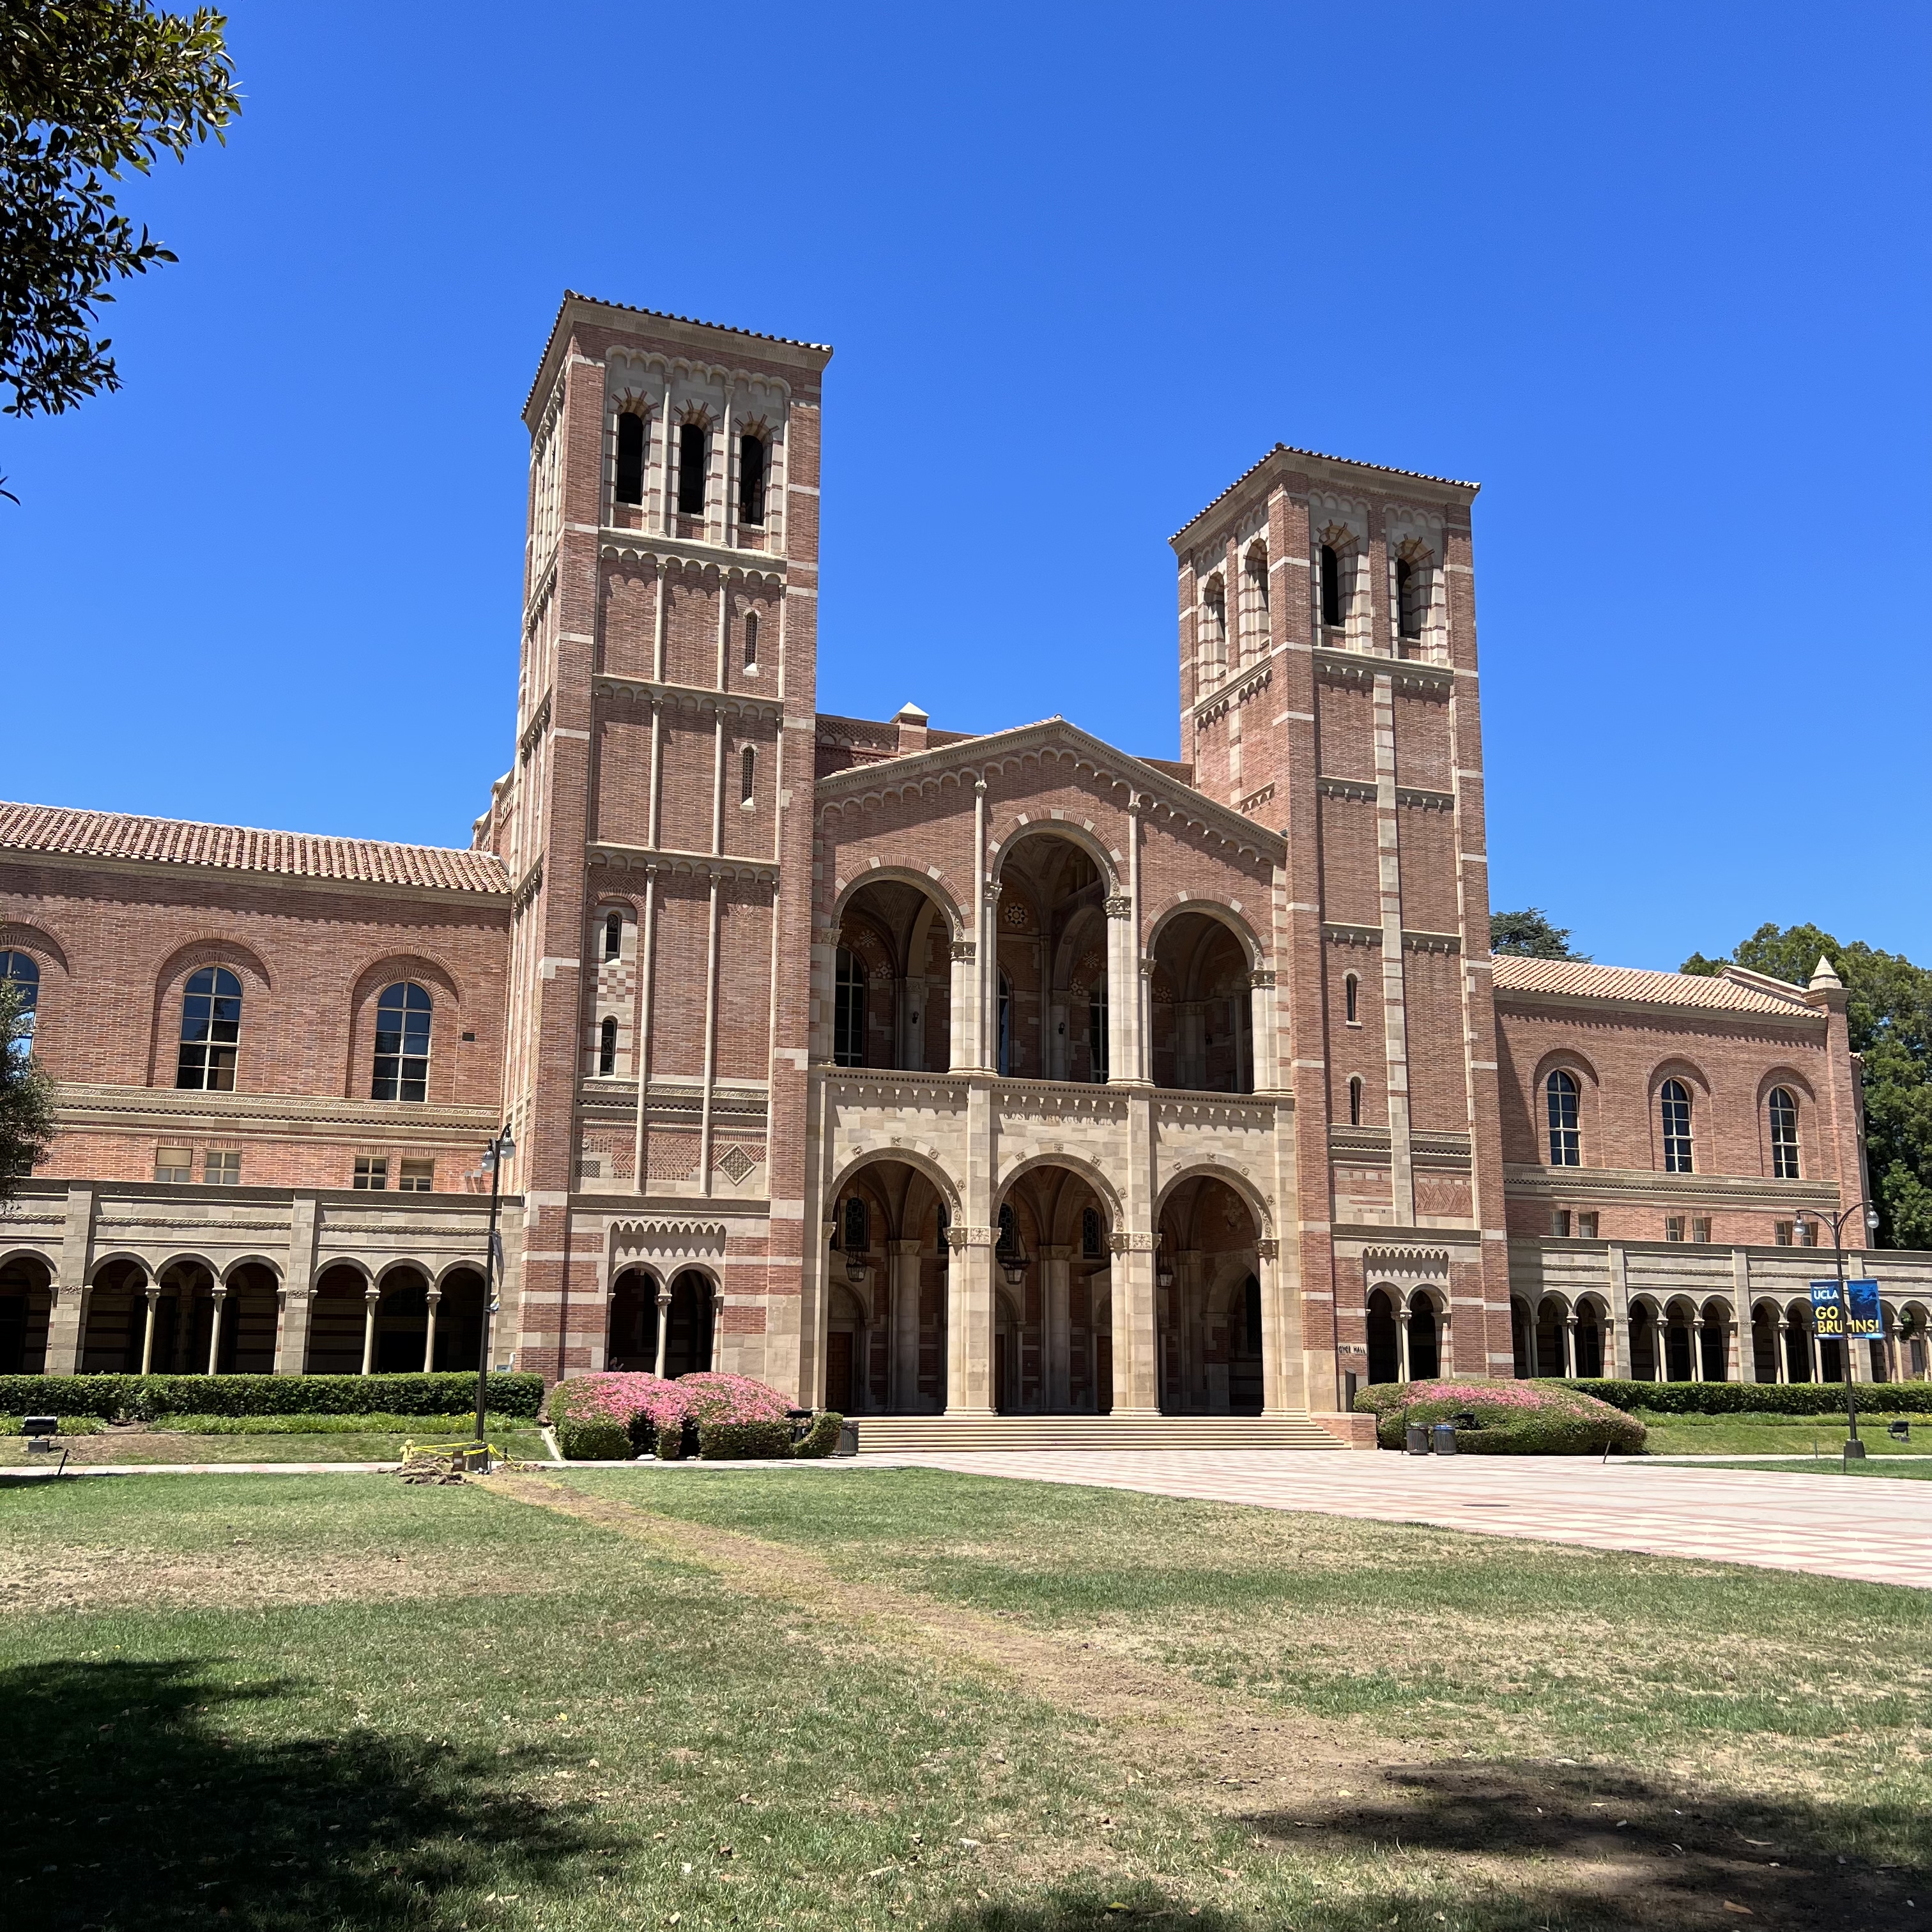 The main building of UCLA